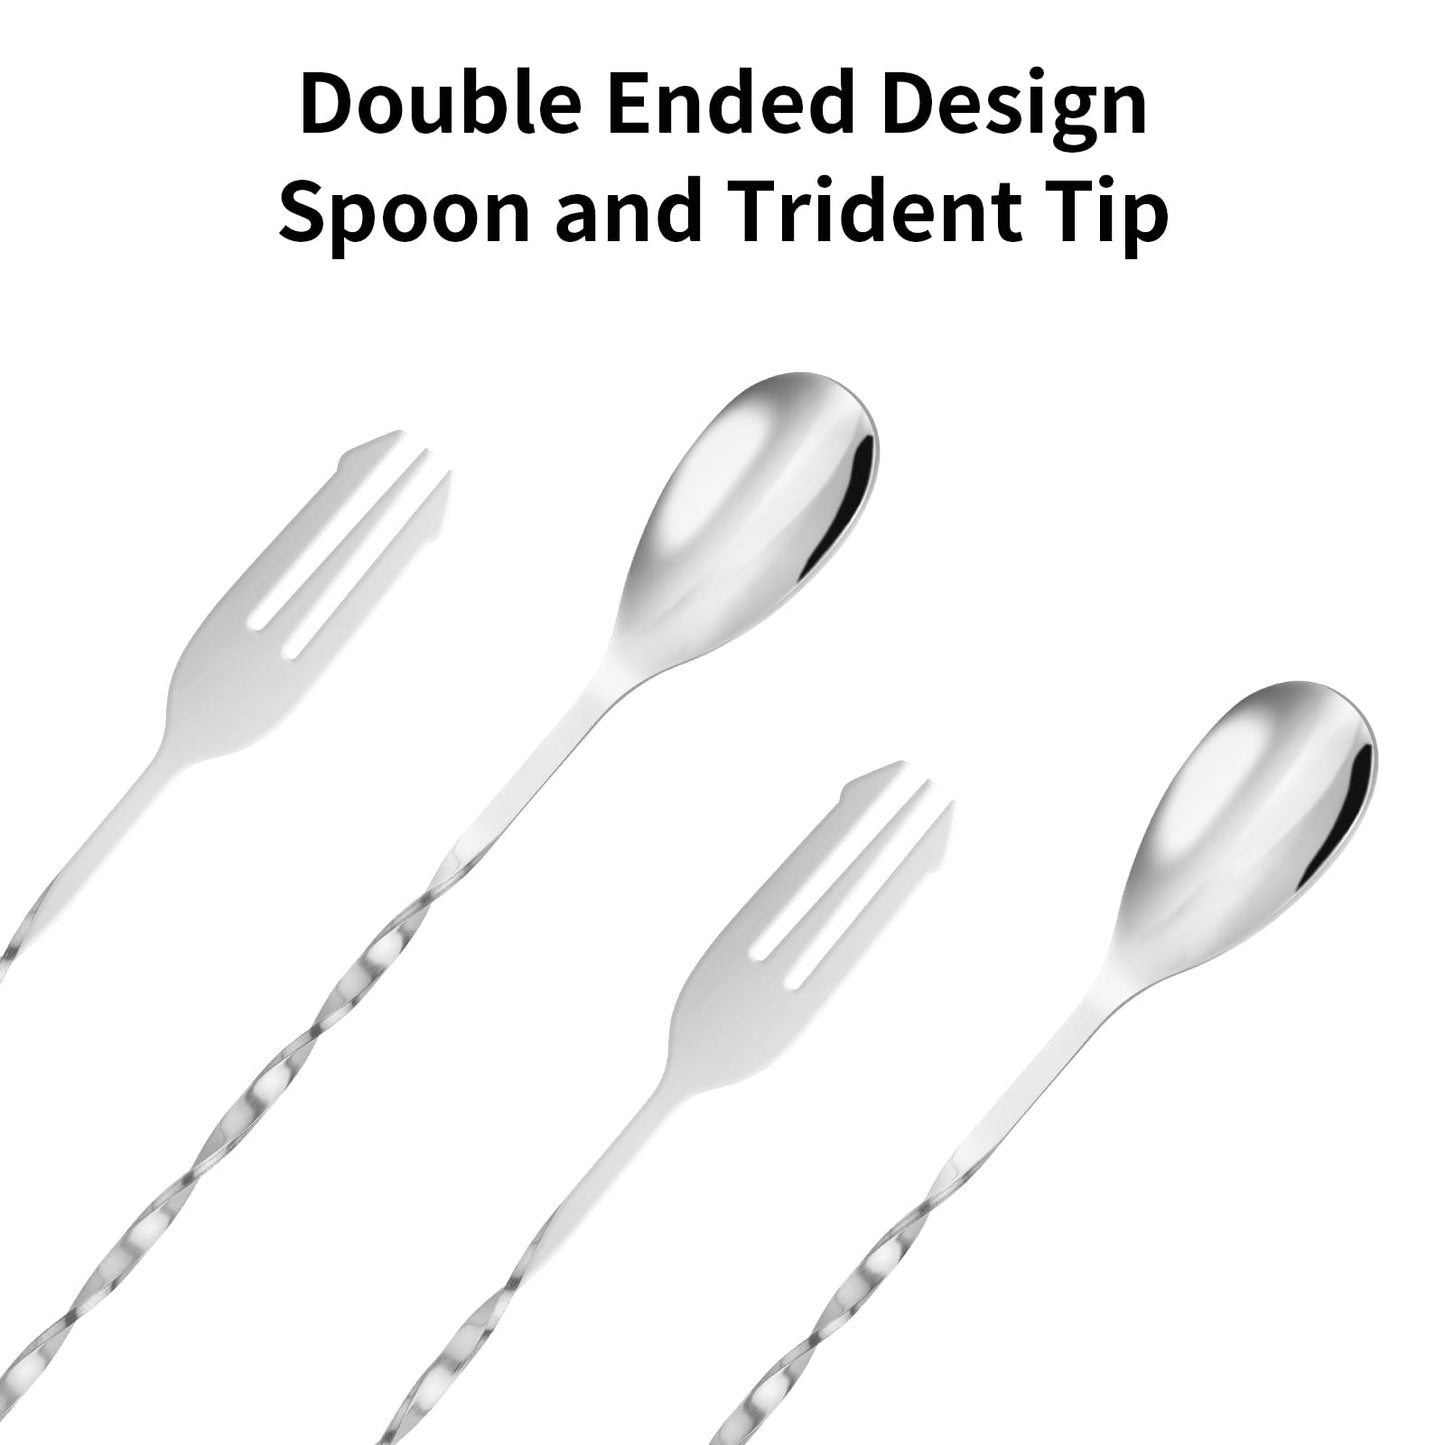 Bar Spoon Cocktail Mixing Spoon - Cuttte 2pcs Cocktail Spoon Long Handle 12.7 Inches, Stainless Steel Drink Stirrers Cocktail Stirrer with Trident Tip, Long Stirring Spoons Bar Mixing Spoons